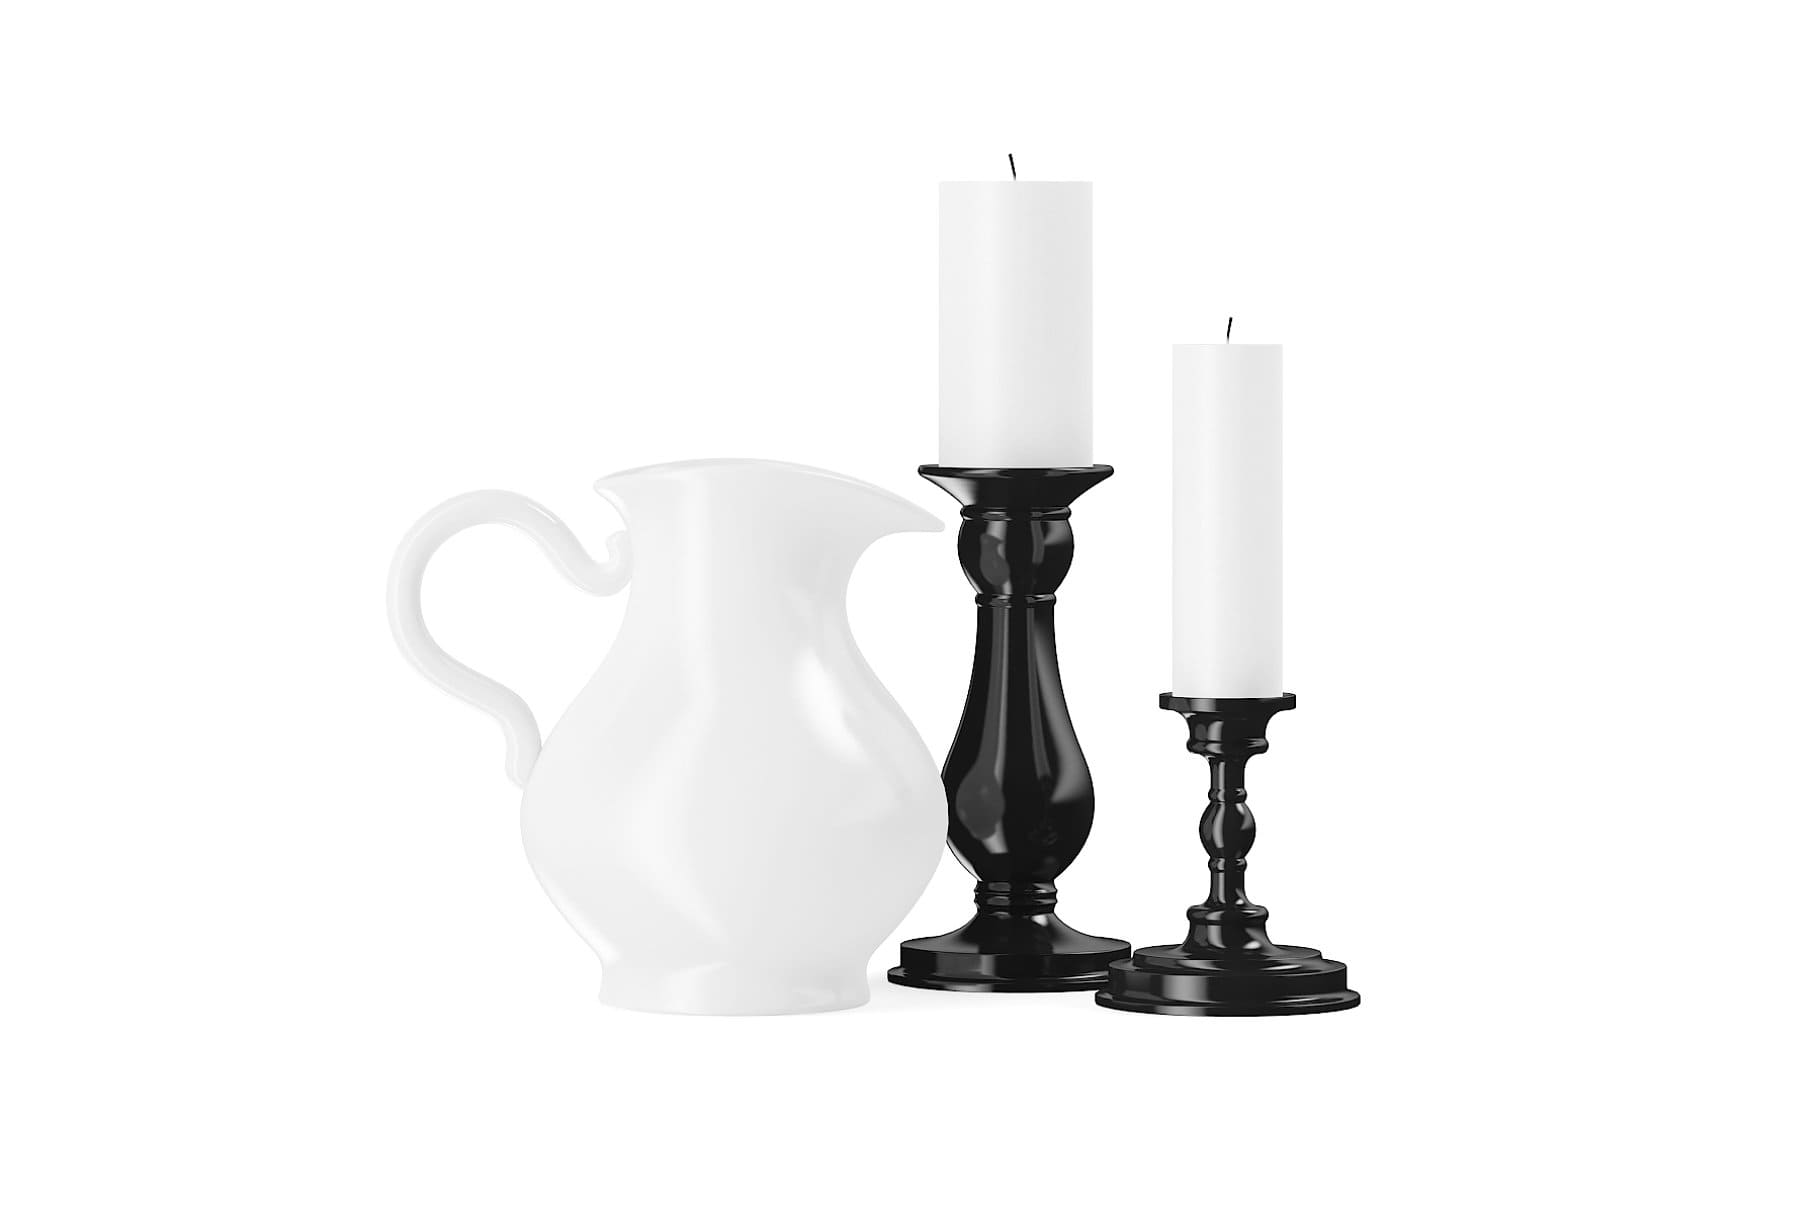 A white elegant mug and two white paraffin candles of different sizes.